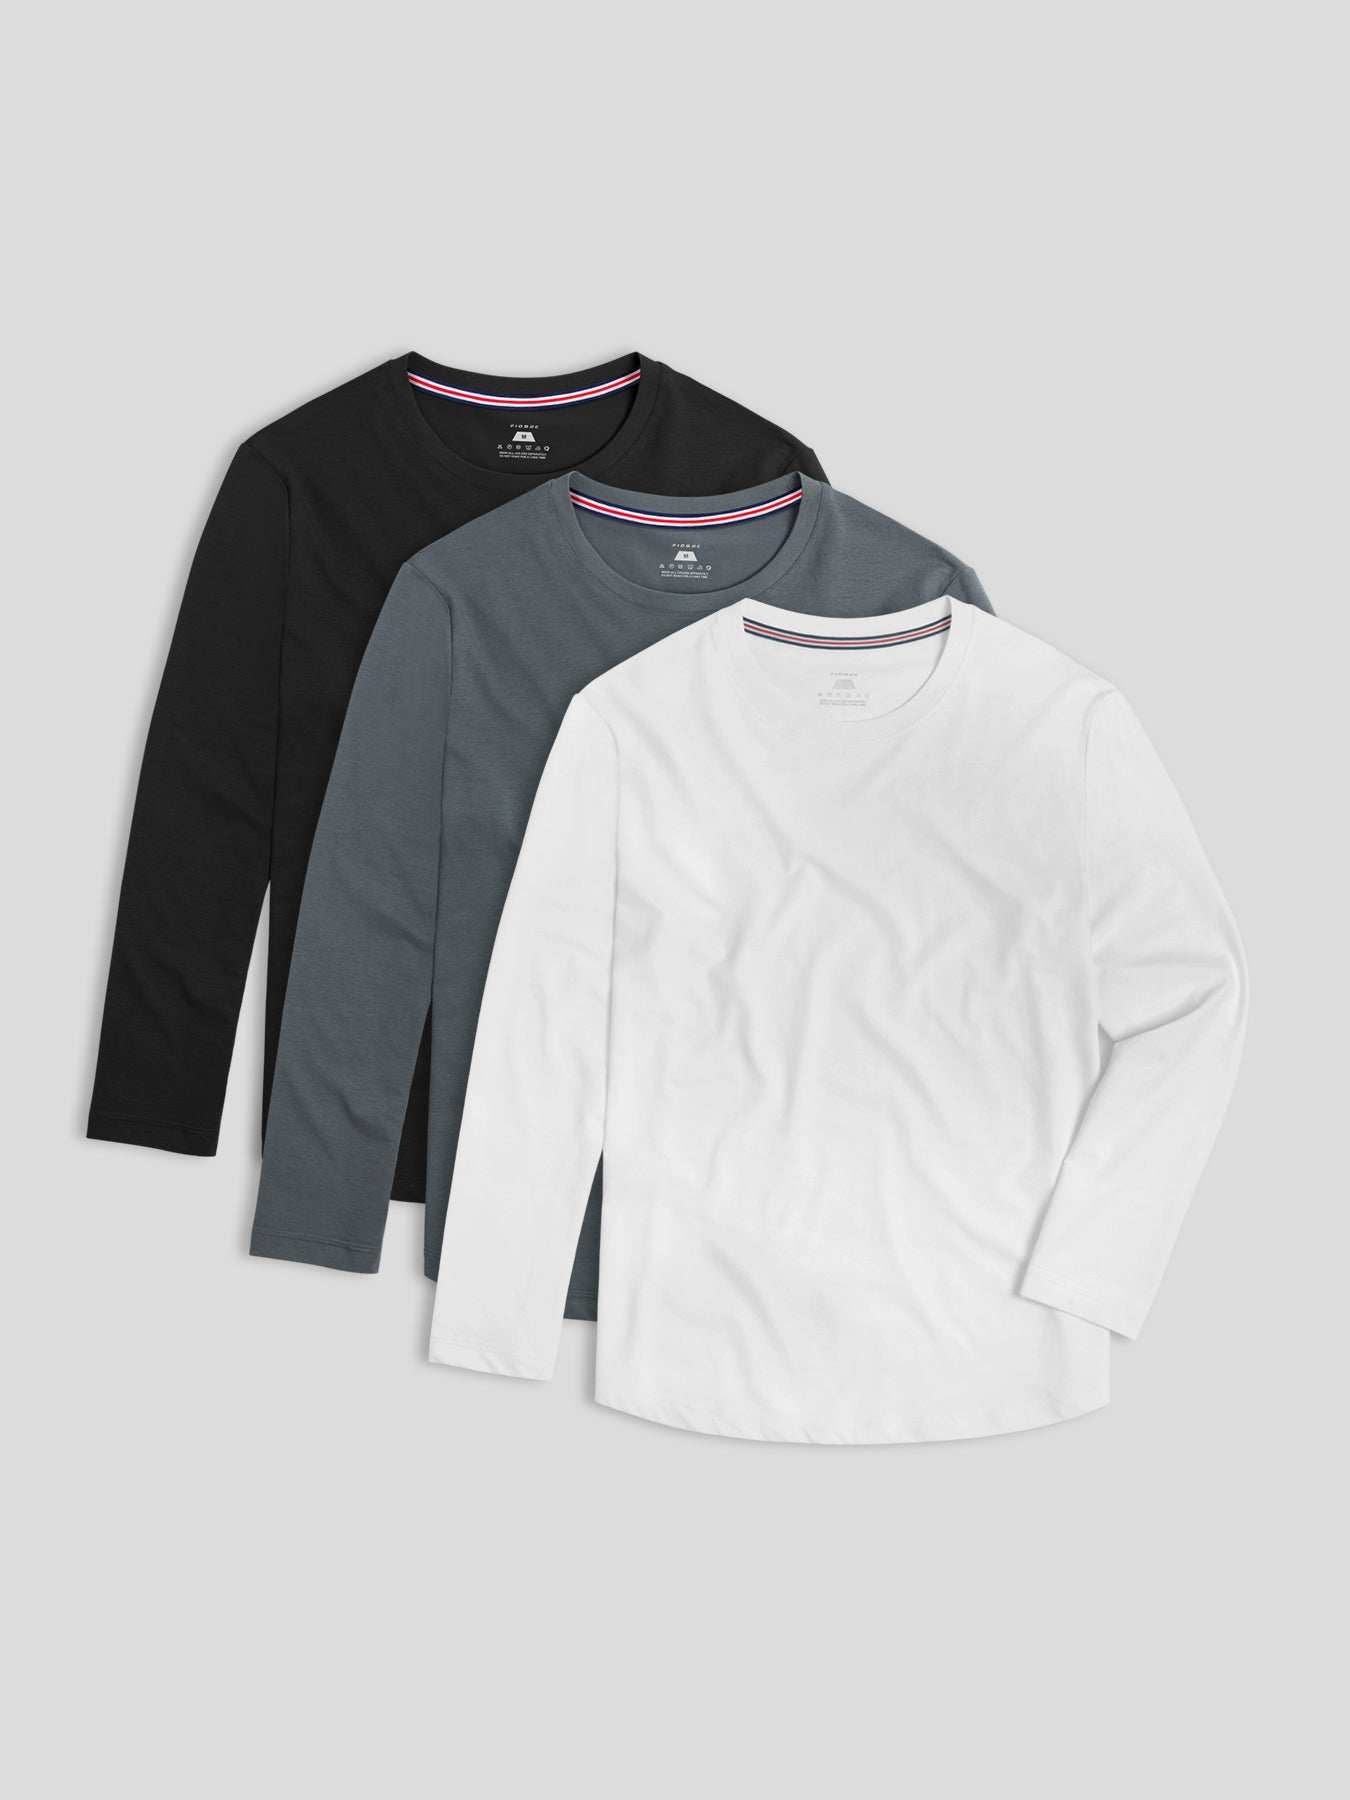 StaySmooth Long Sleeve Tee Multicolor 3-Pack:Classic Fit